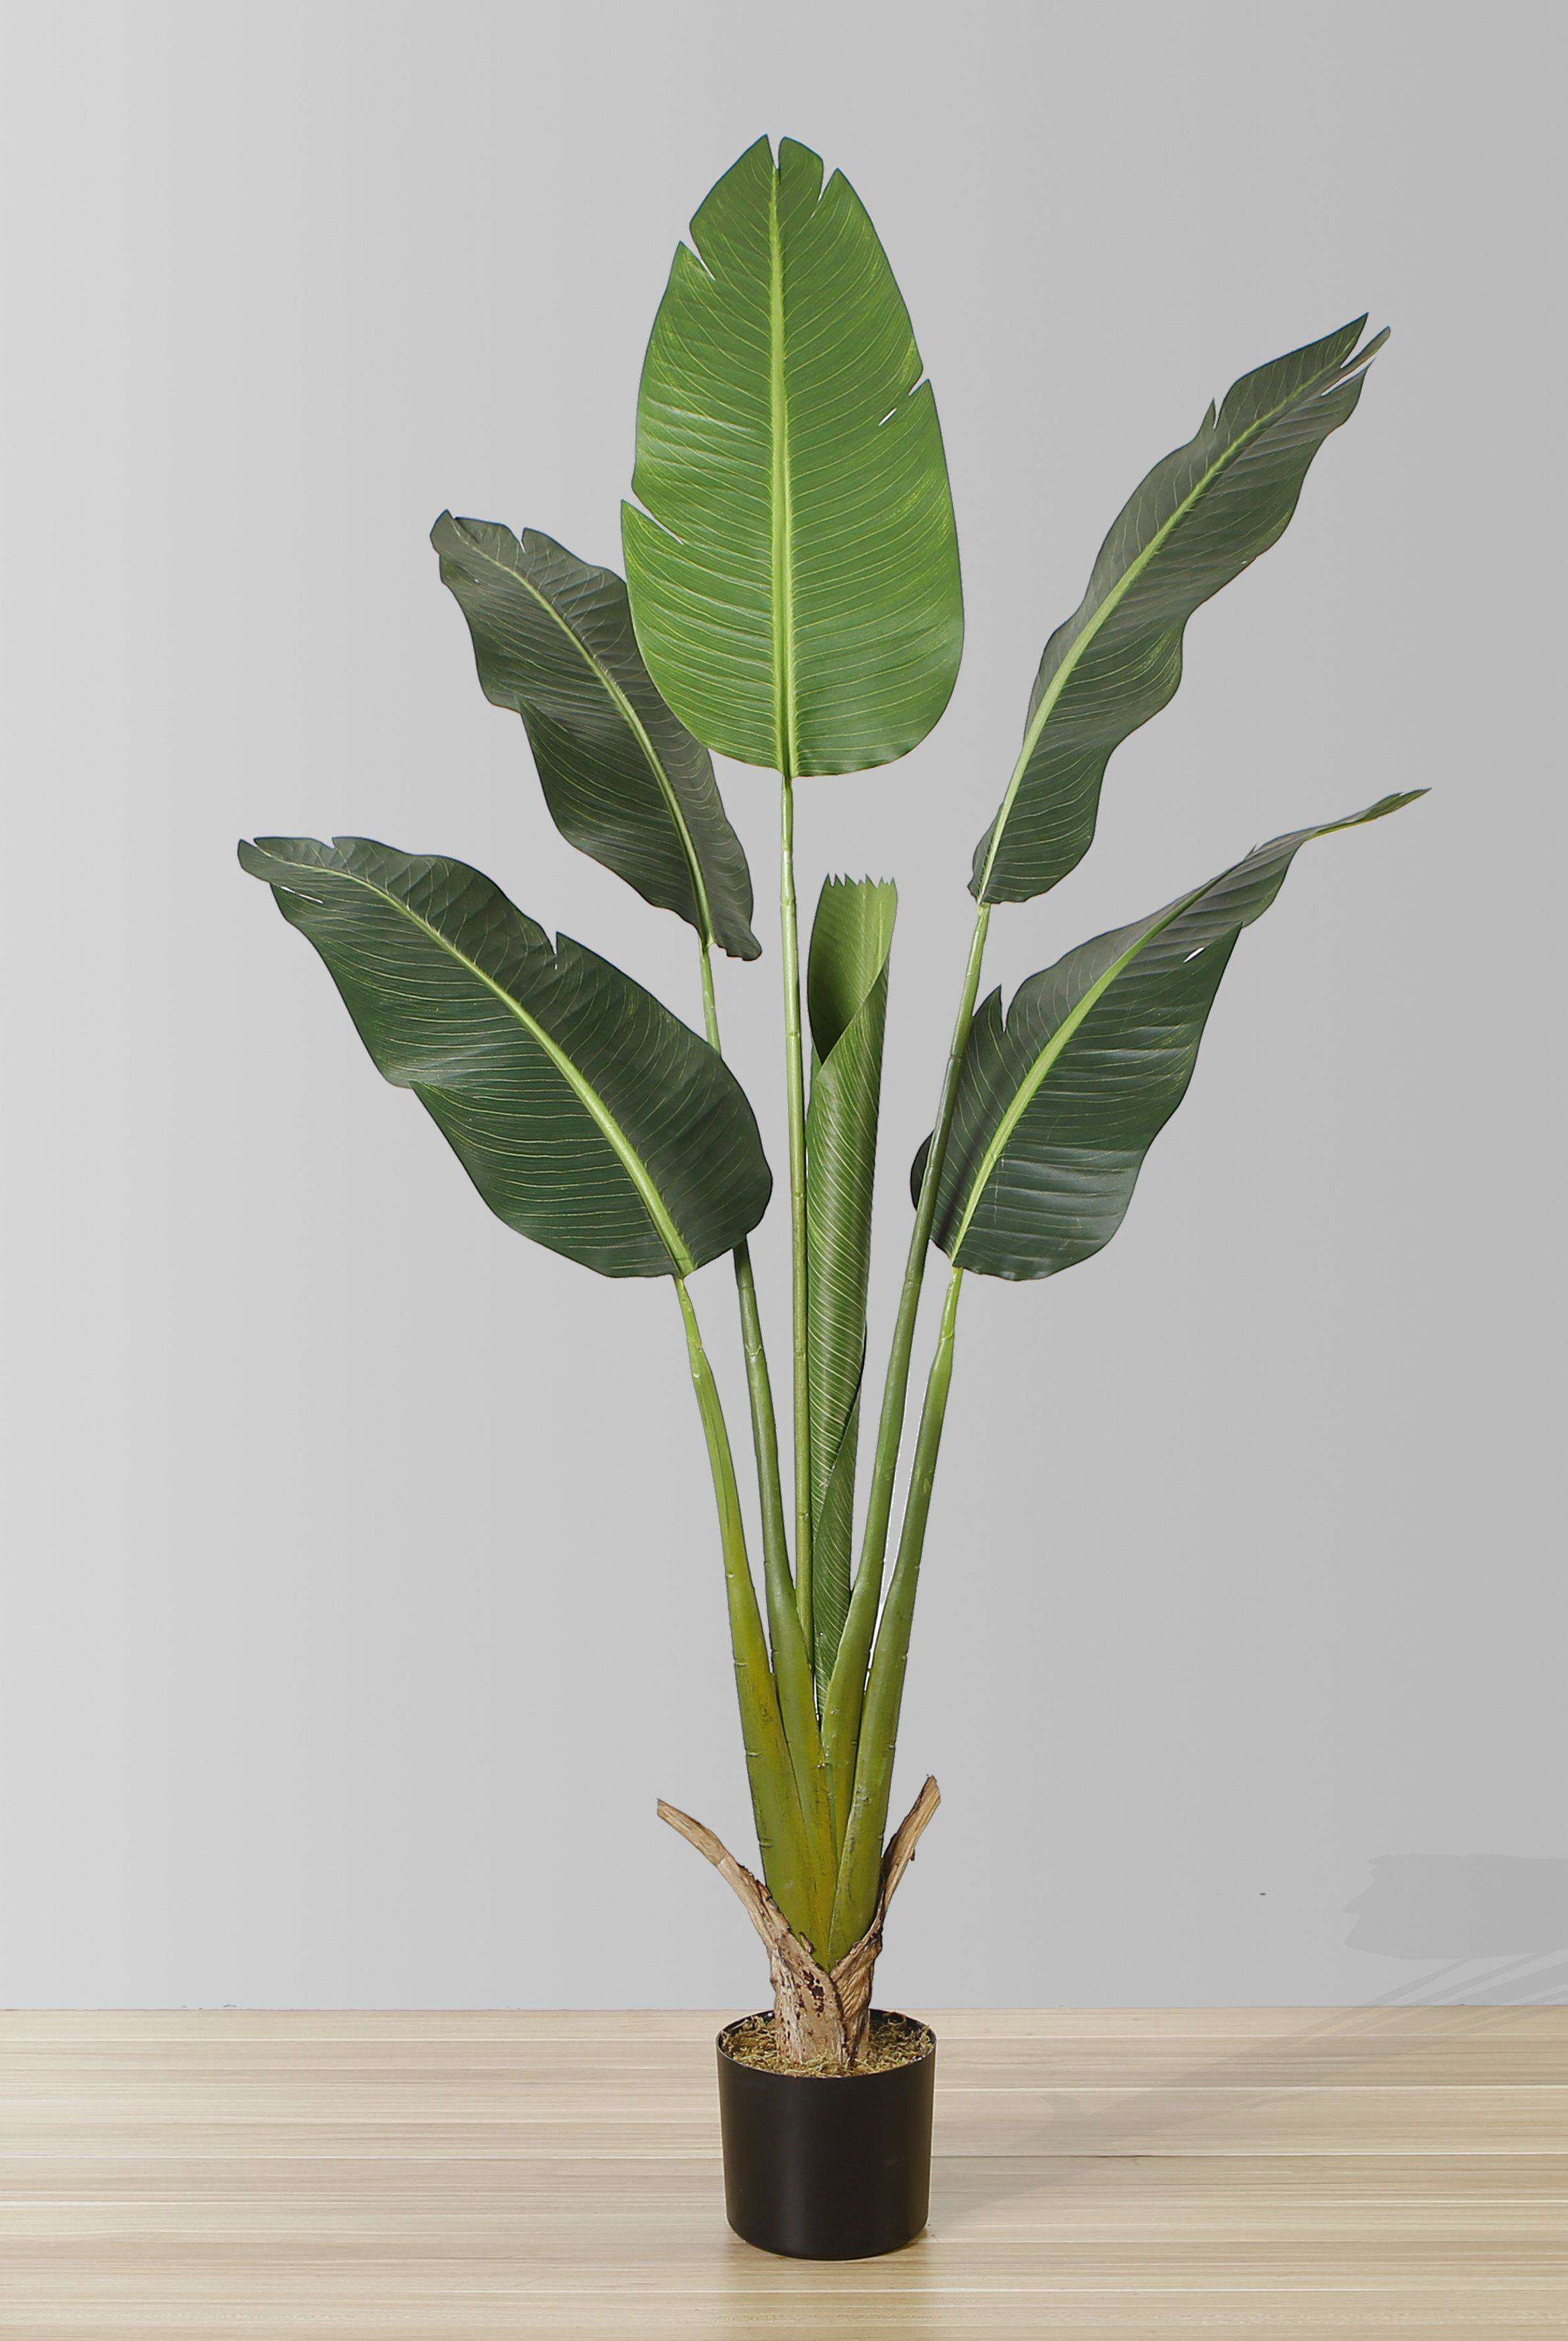 LUCA Artificial Bird Of Paradise Potted Plant (Multiple Sizes) ArtiPlanto